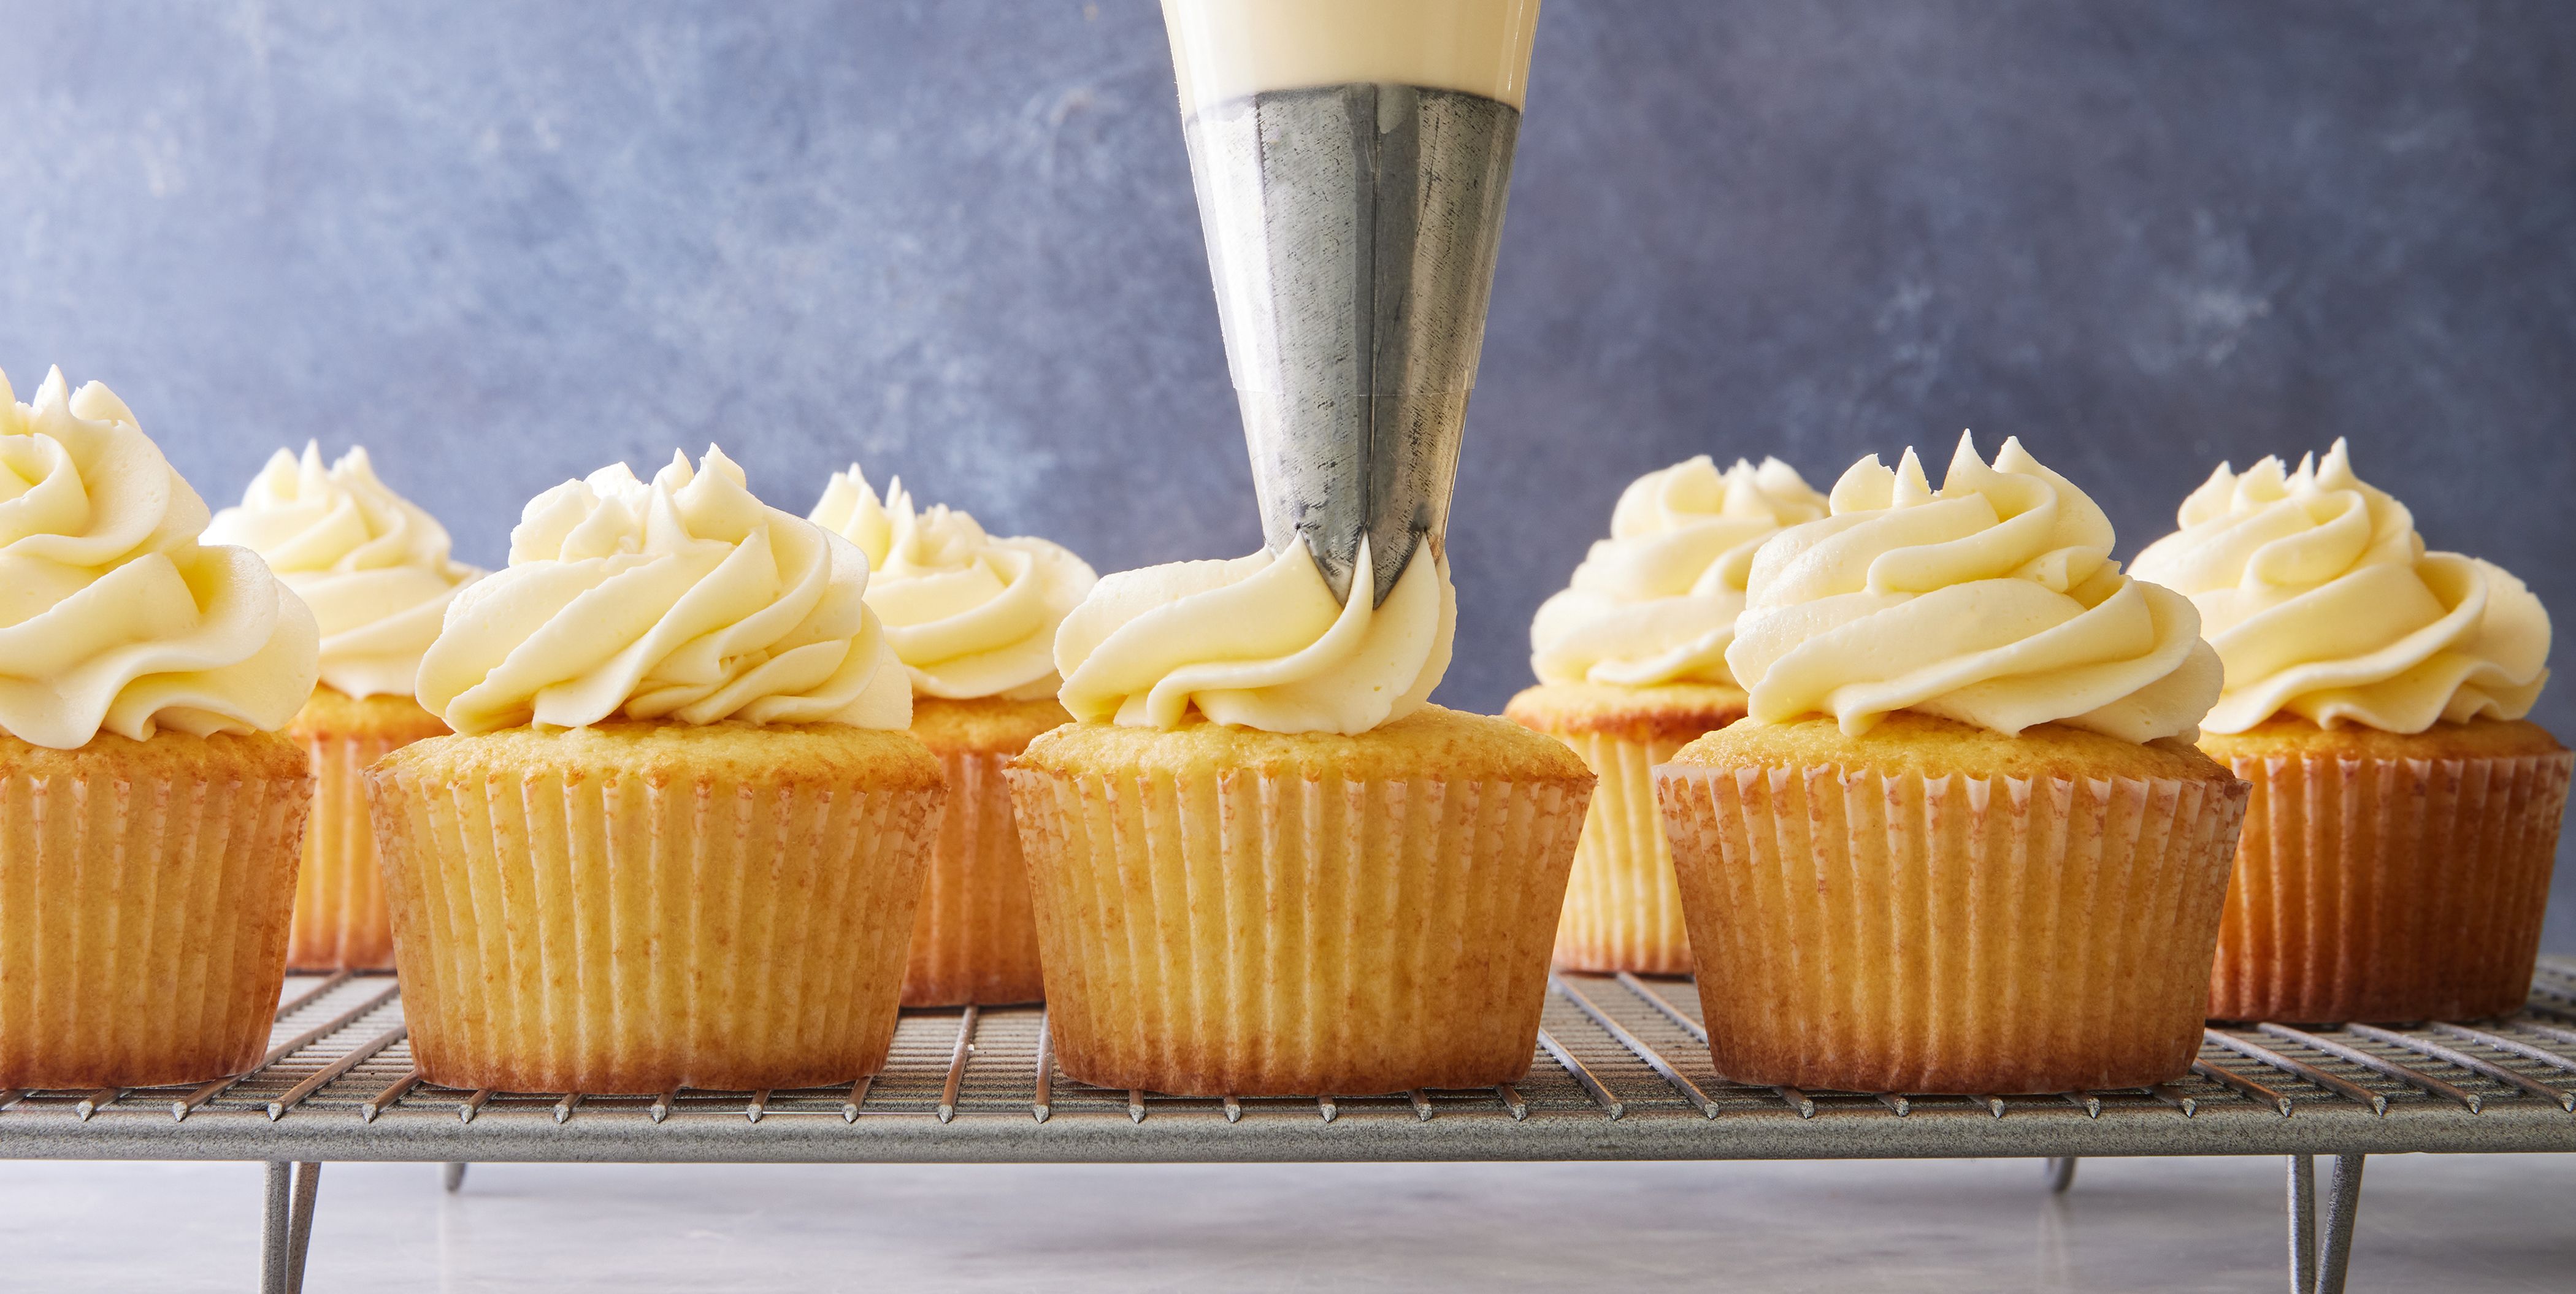 The BEST Cream Cheese Frosting - Live Well Bake Often